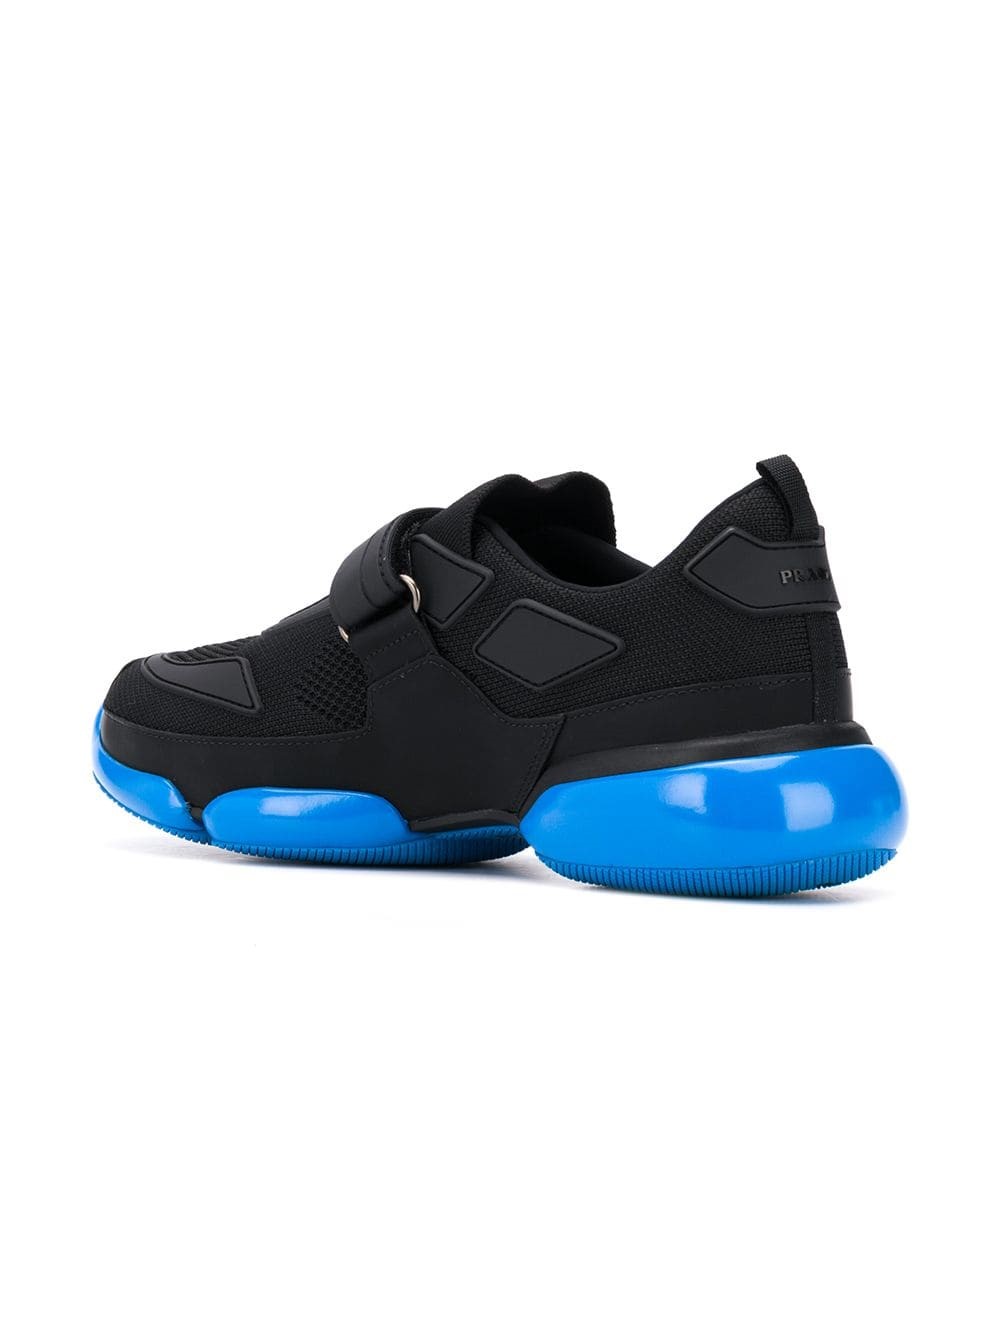 prada CLOUDBUST SNEAKERS available on 